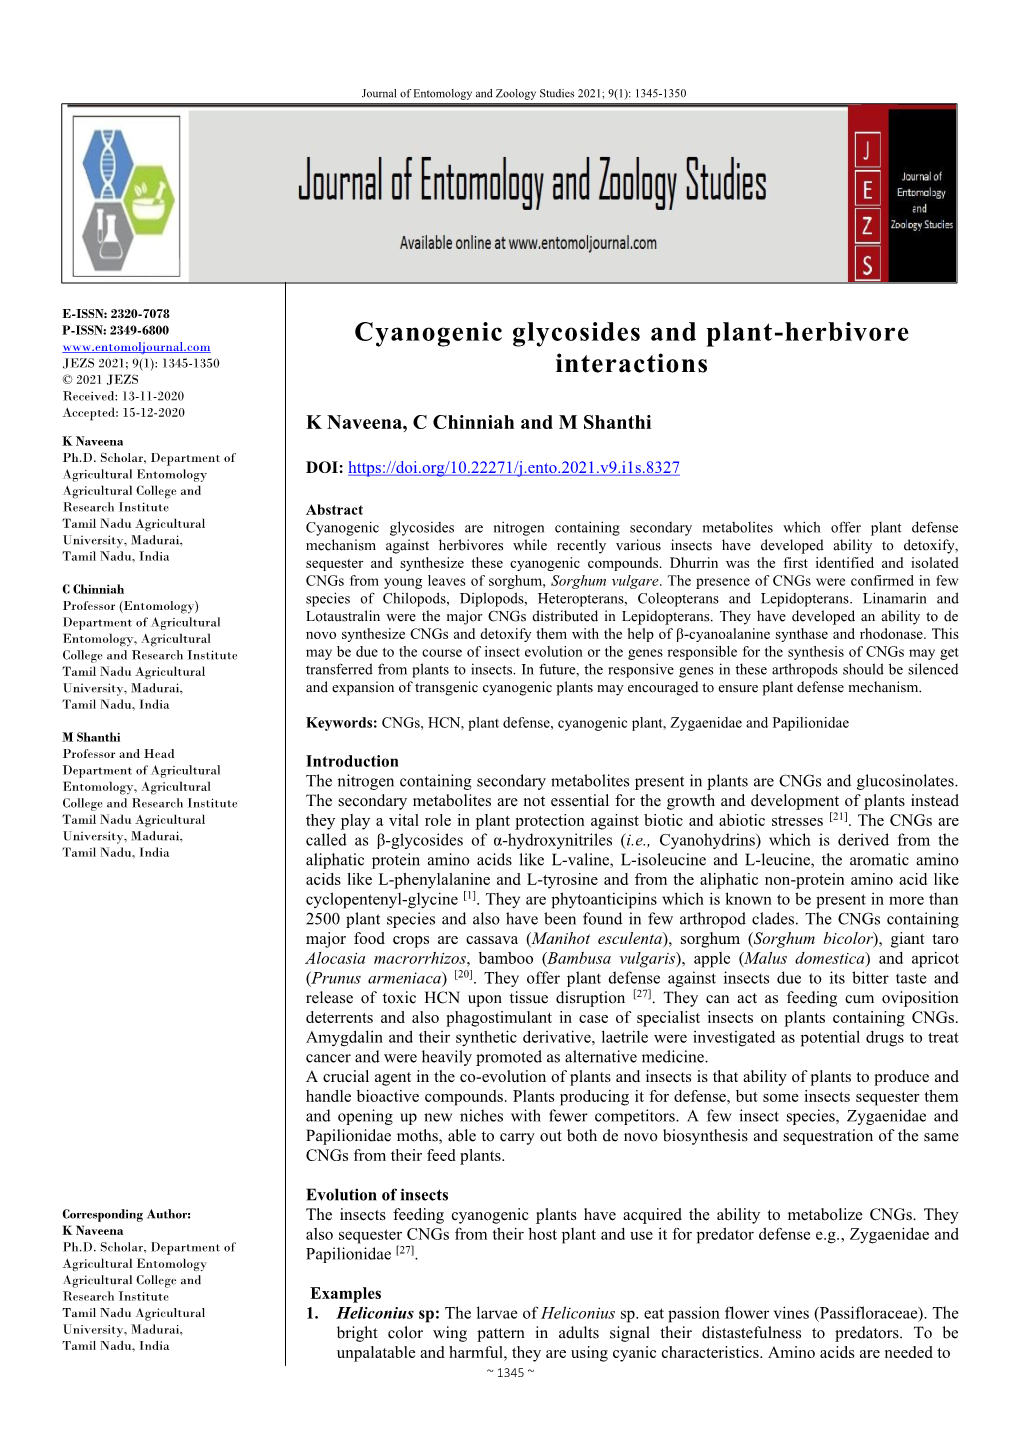 Cyanogenic Glycosides and Plant-Herbivore Interactions